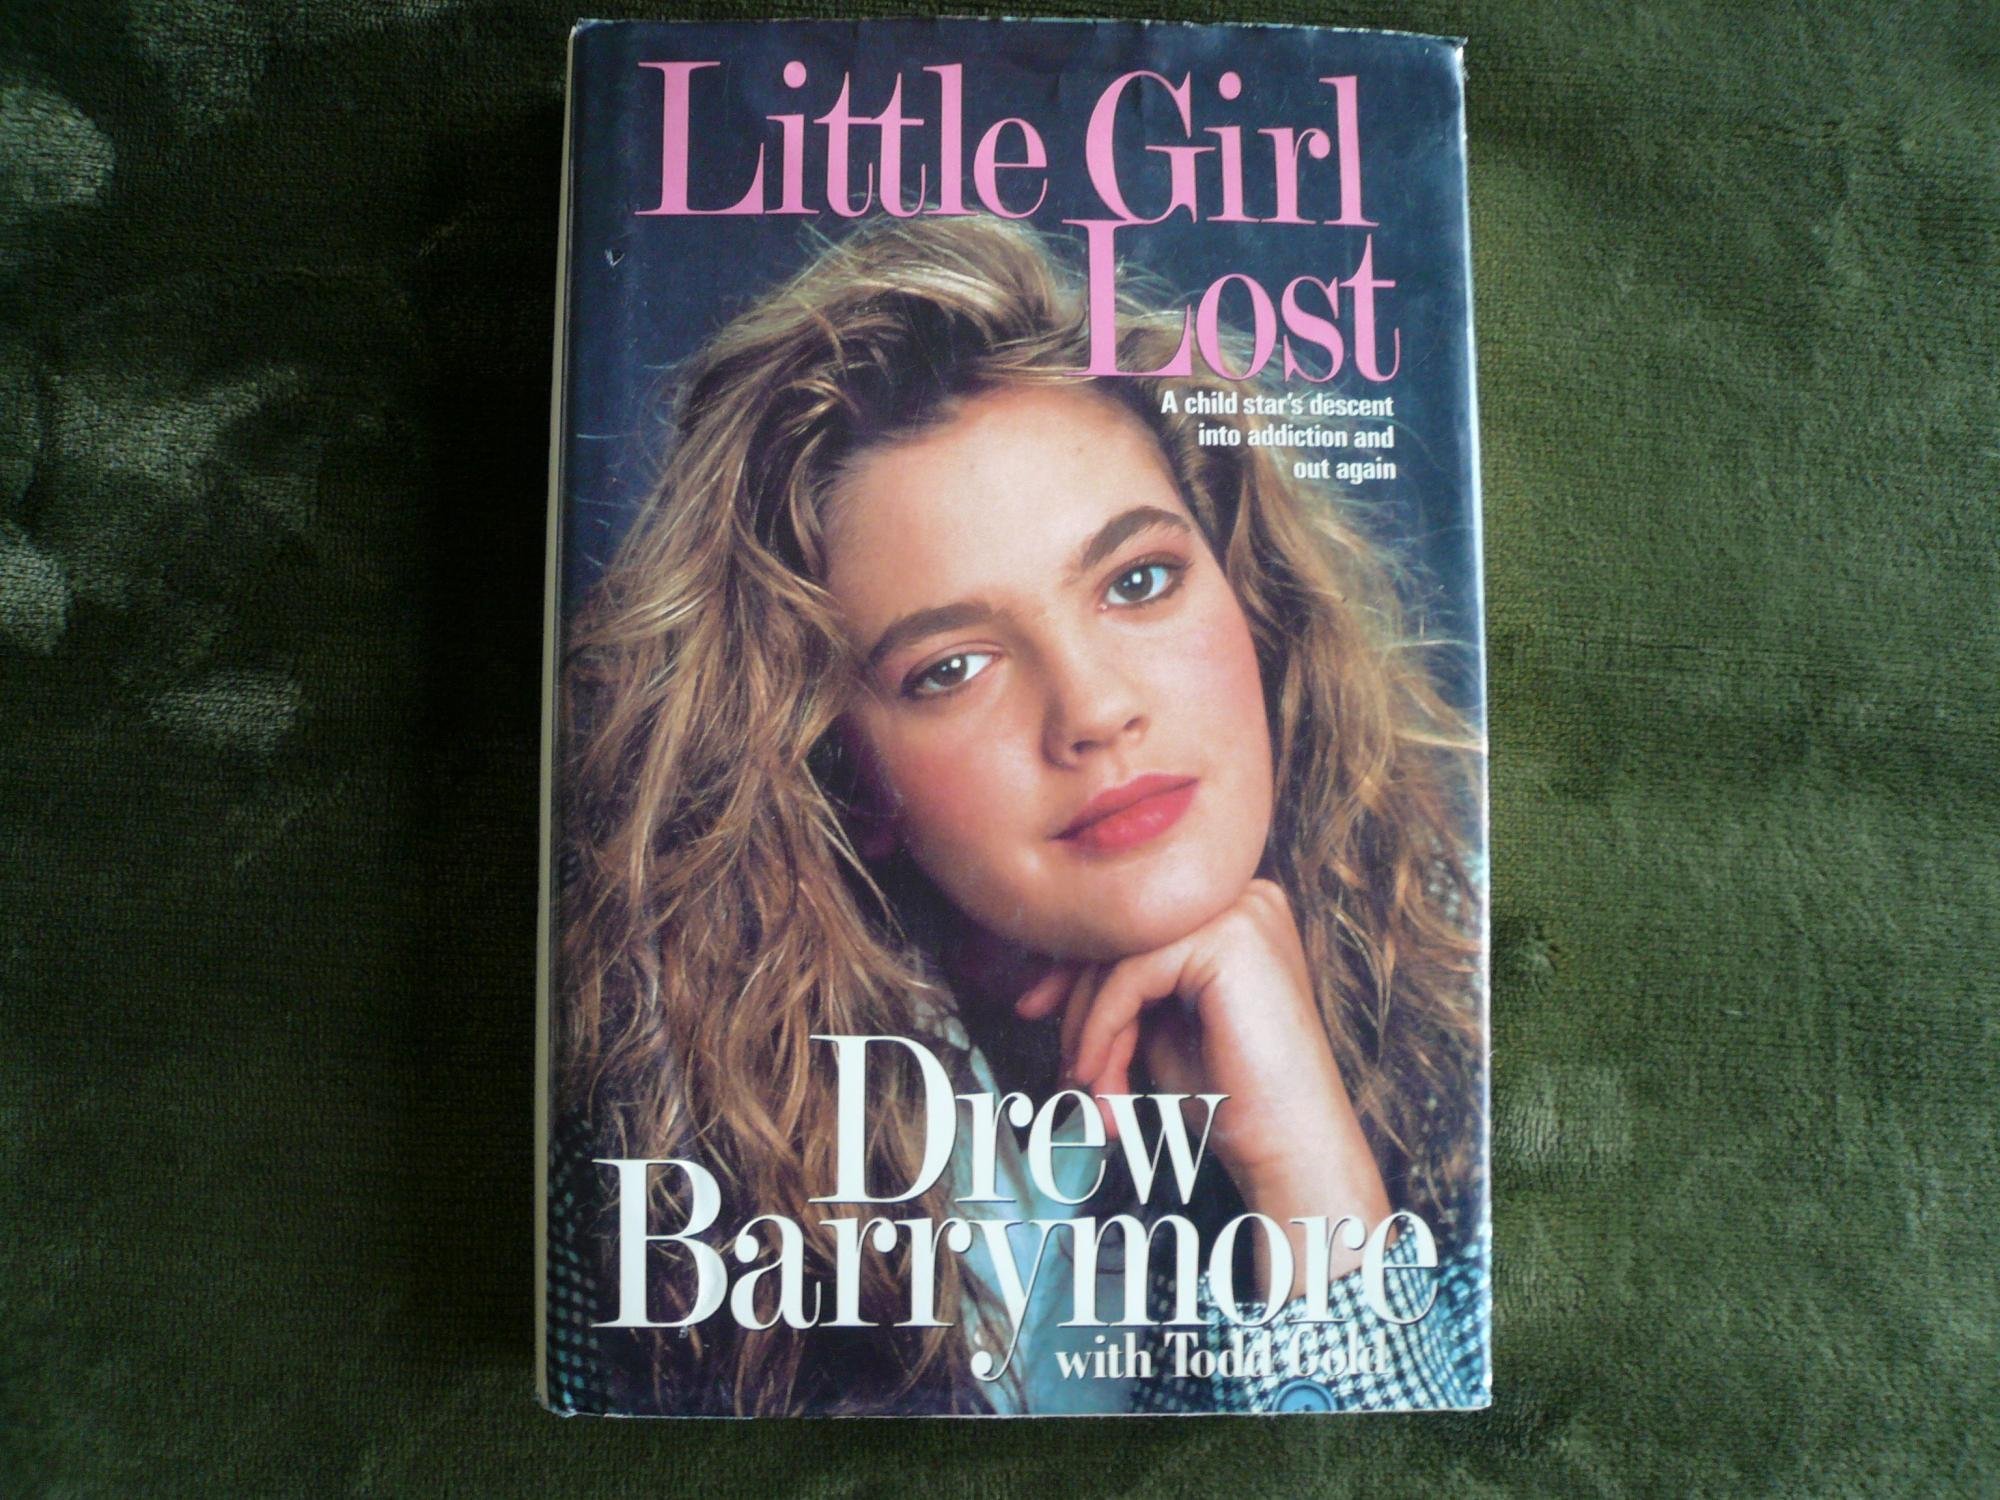 Little Girl Lost, Drew Barrymore and Todd Gold, Paperback, 1991